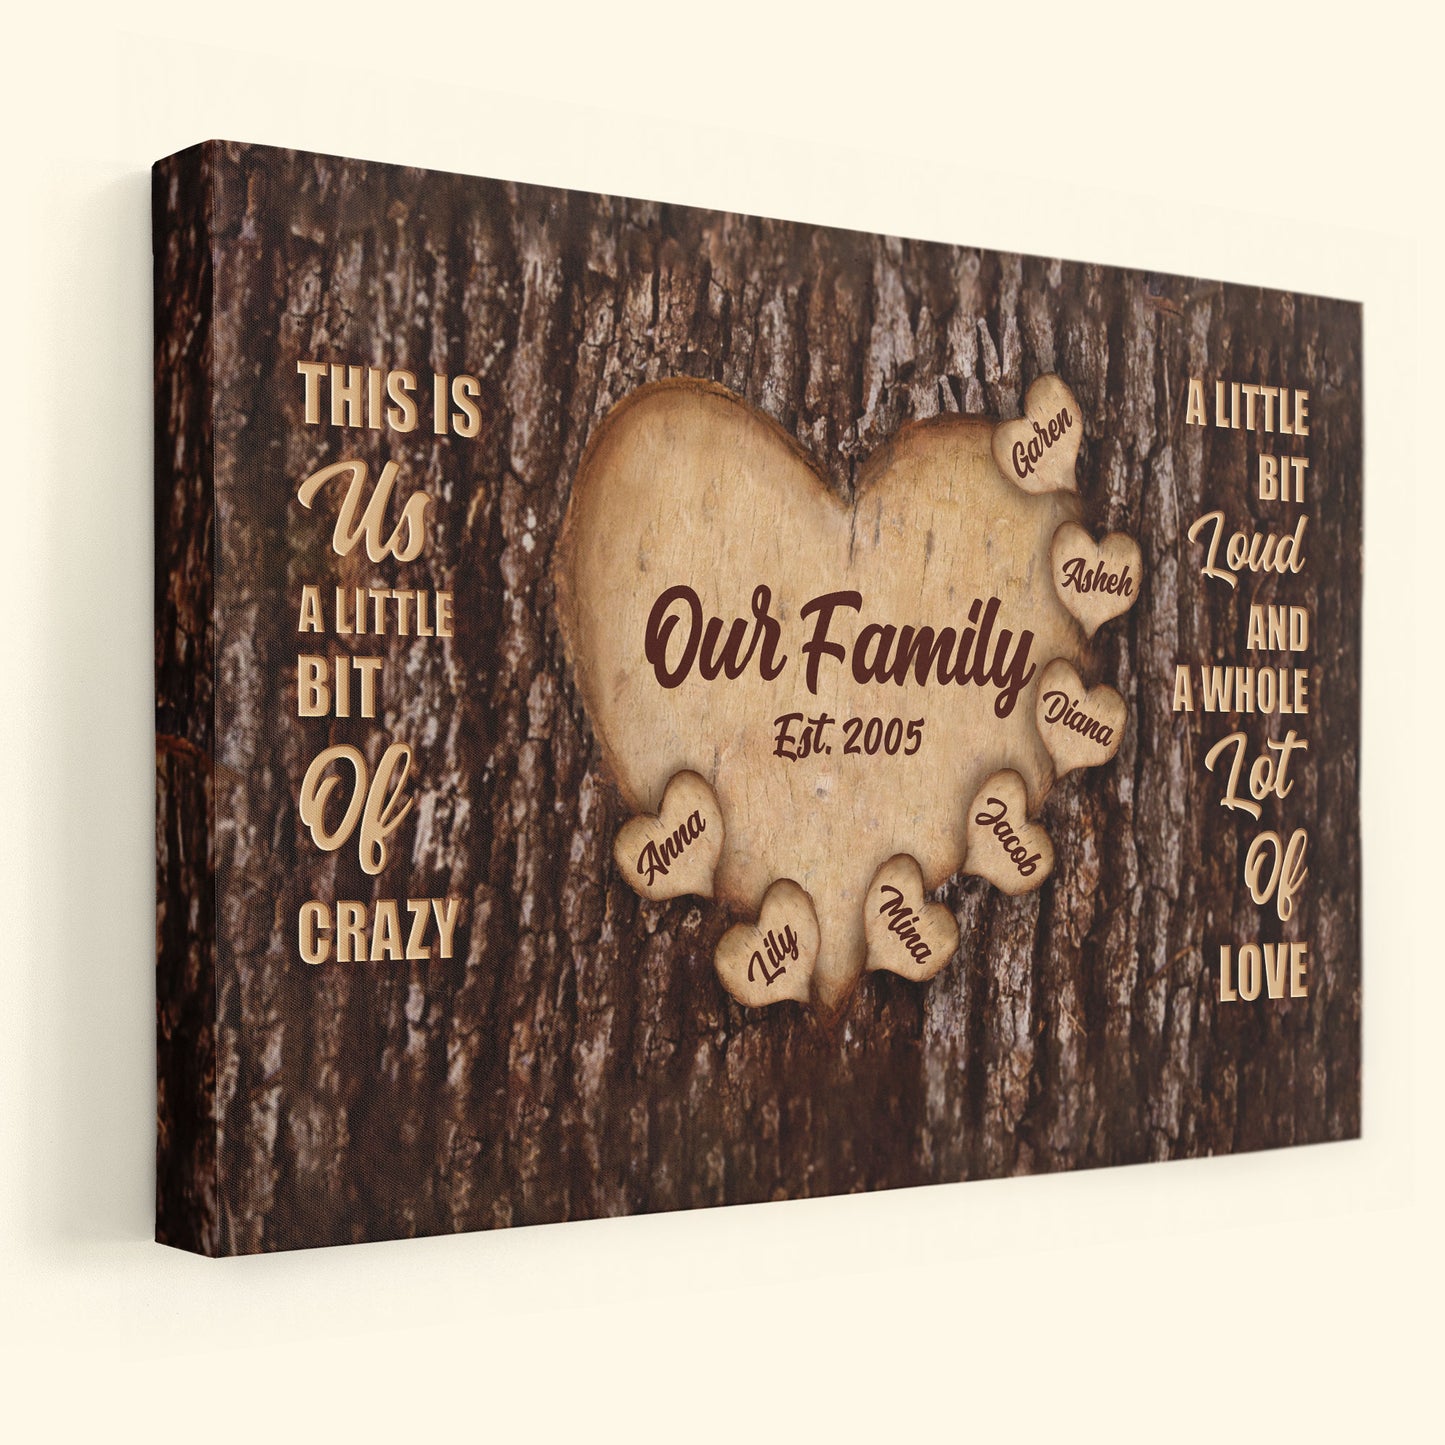 This Is Us A Whole Lot Of Love - Personalized Poster/Wrapped Canvas - Home Décor Gift For Family Members, Parents, Grandparents